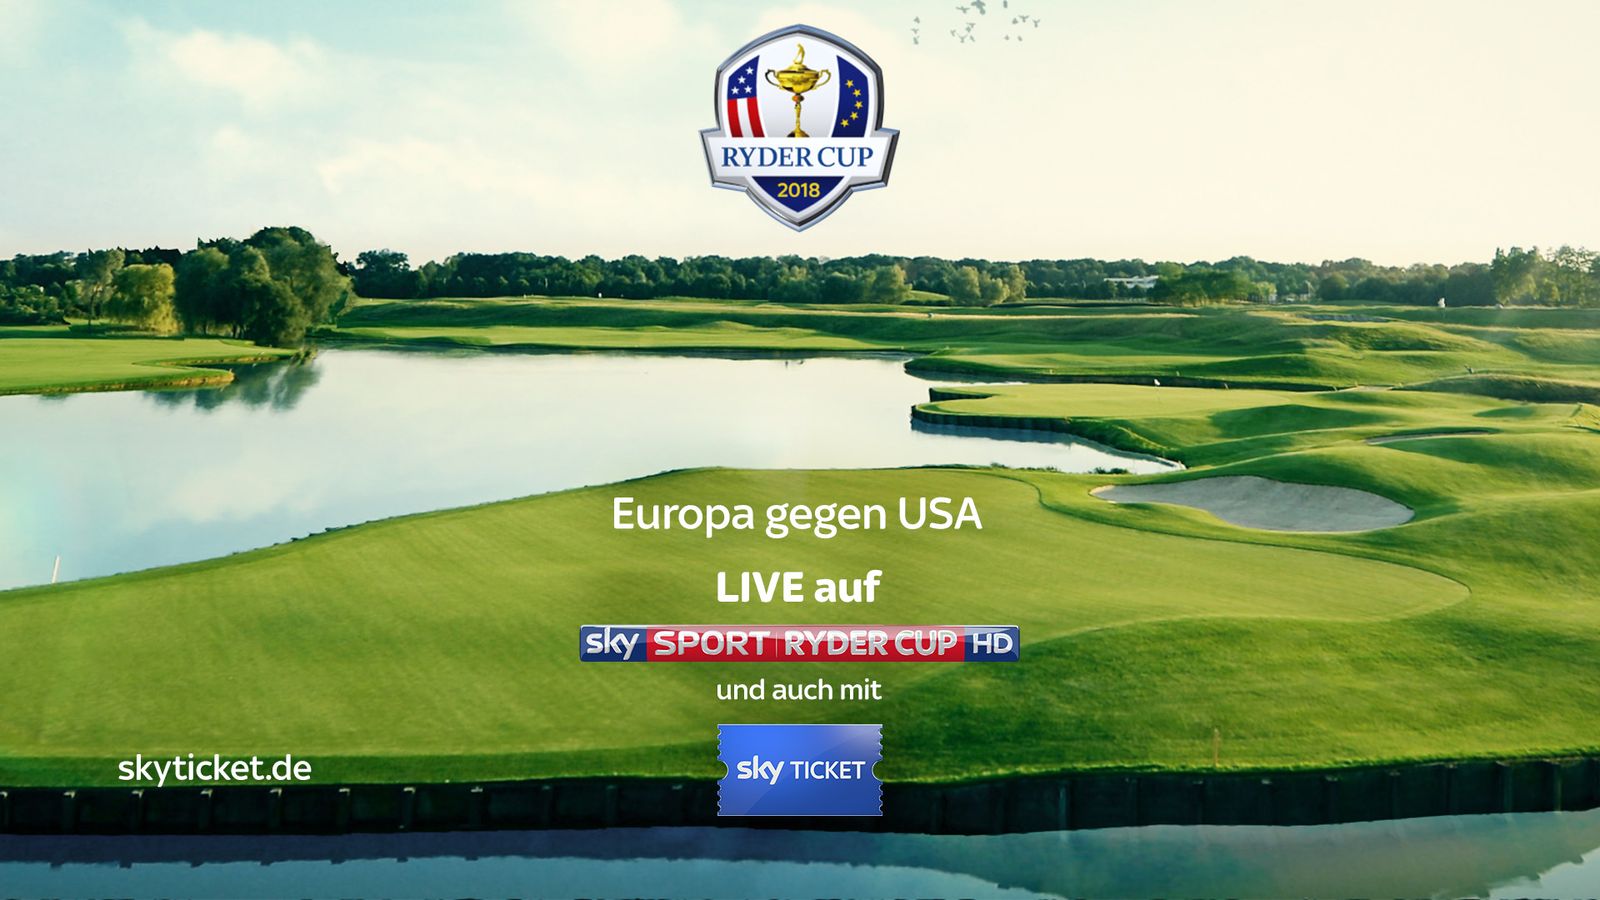 Ryder Cup 2018 im TV mit Tiger Woods, McIlroy and Co